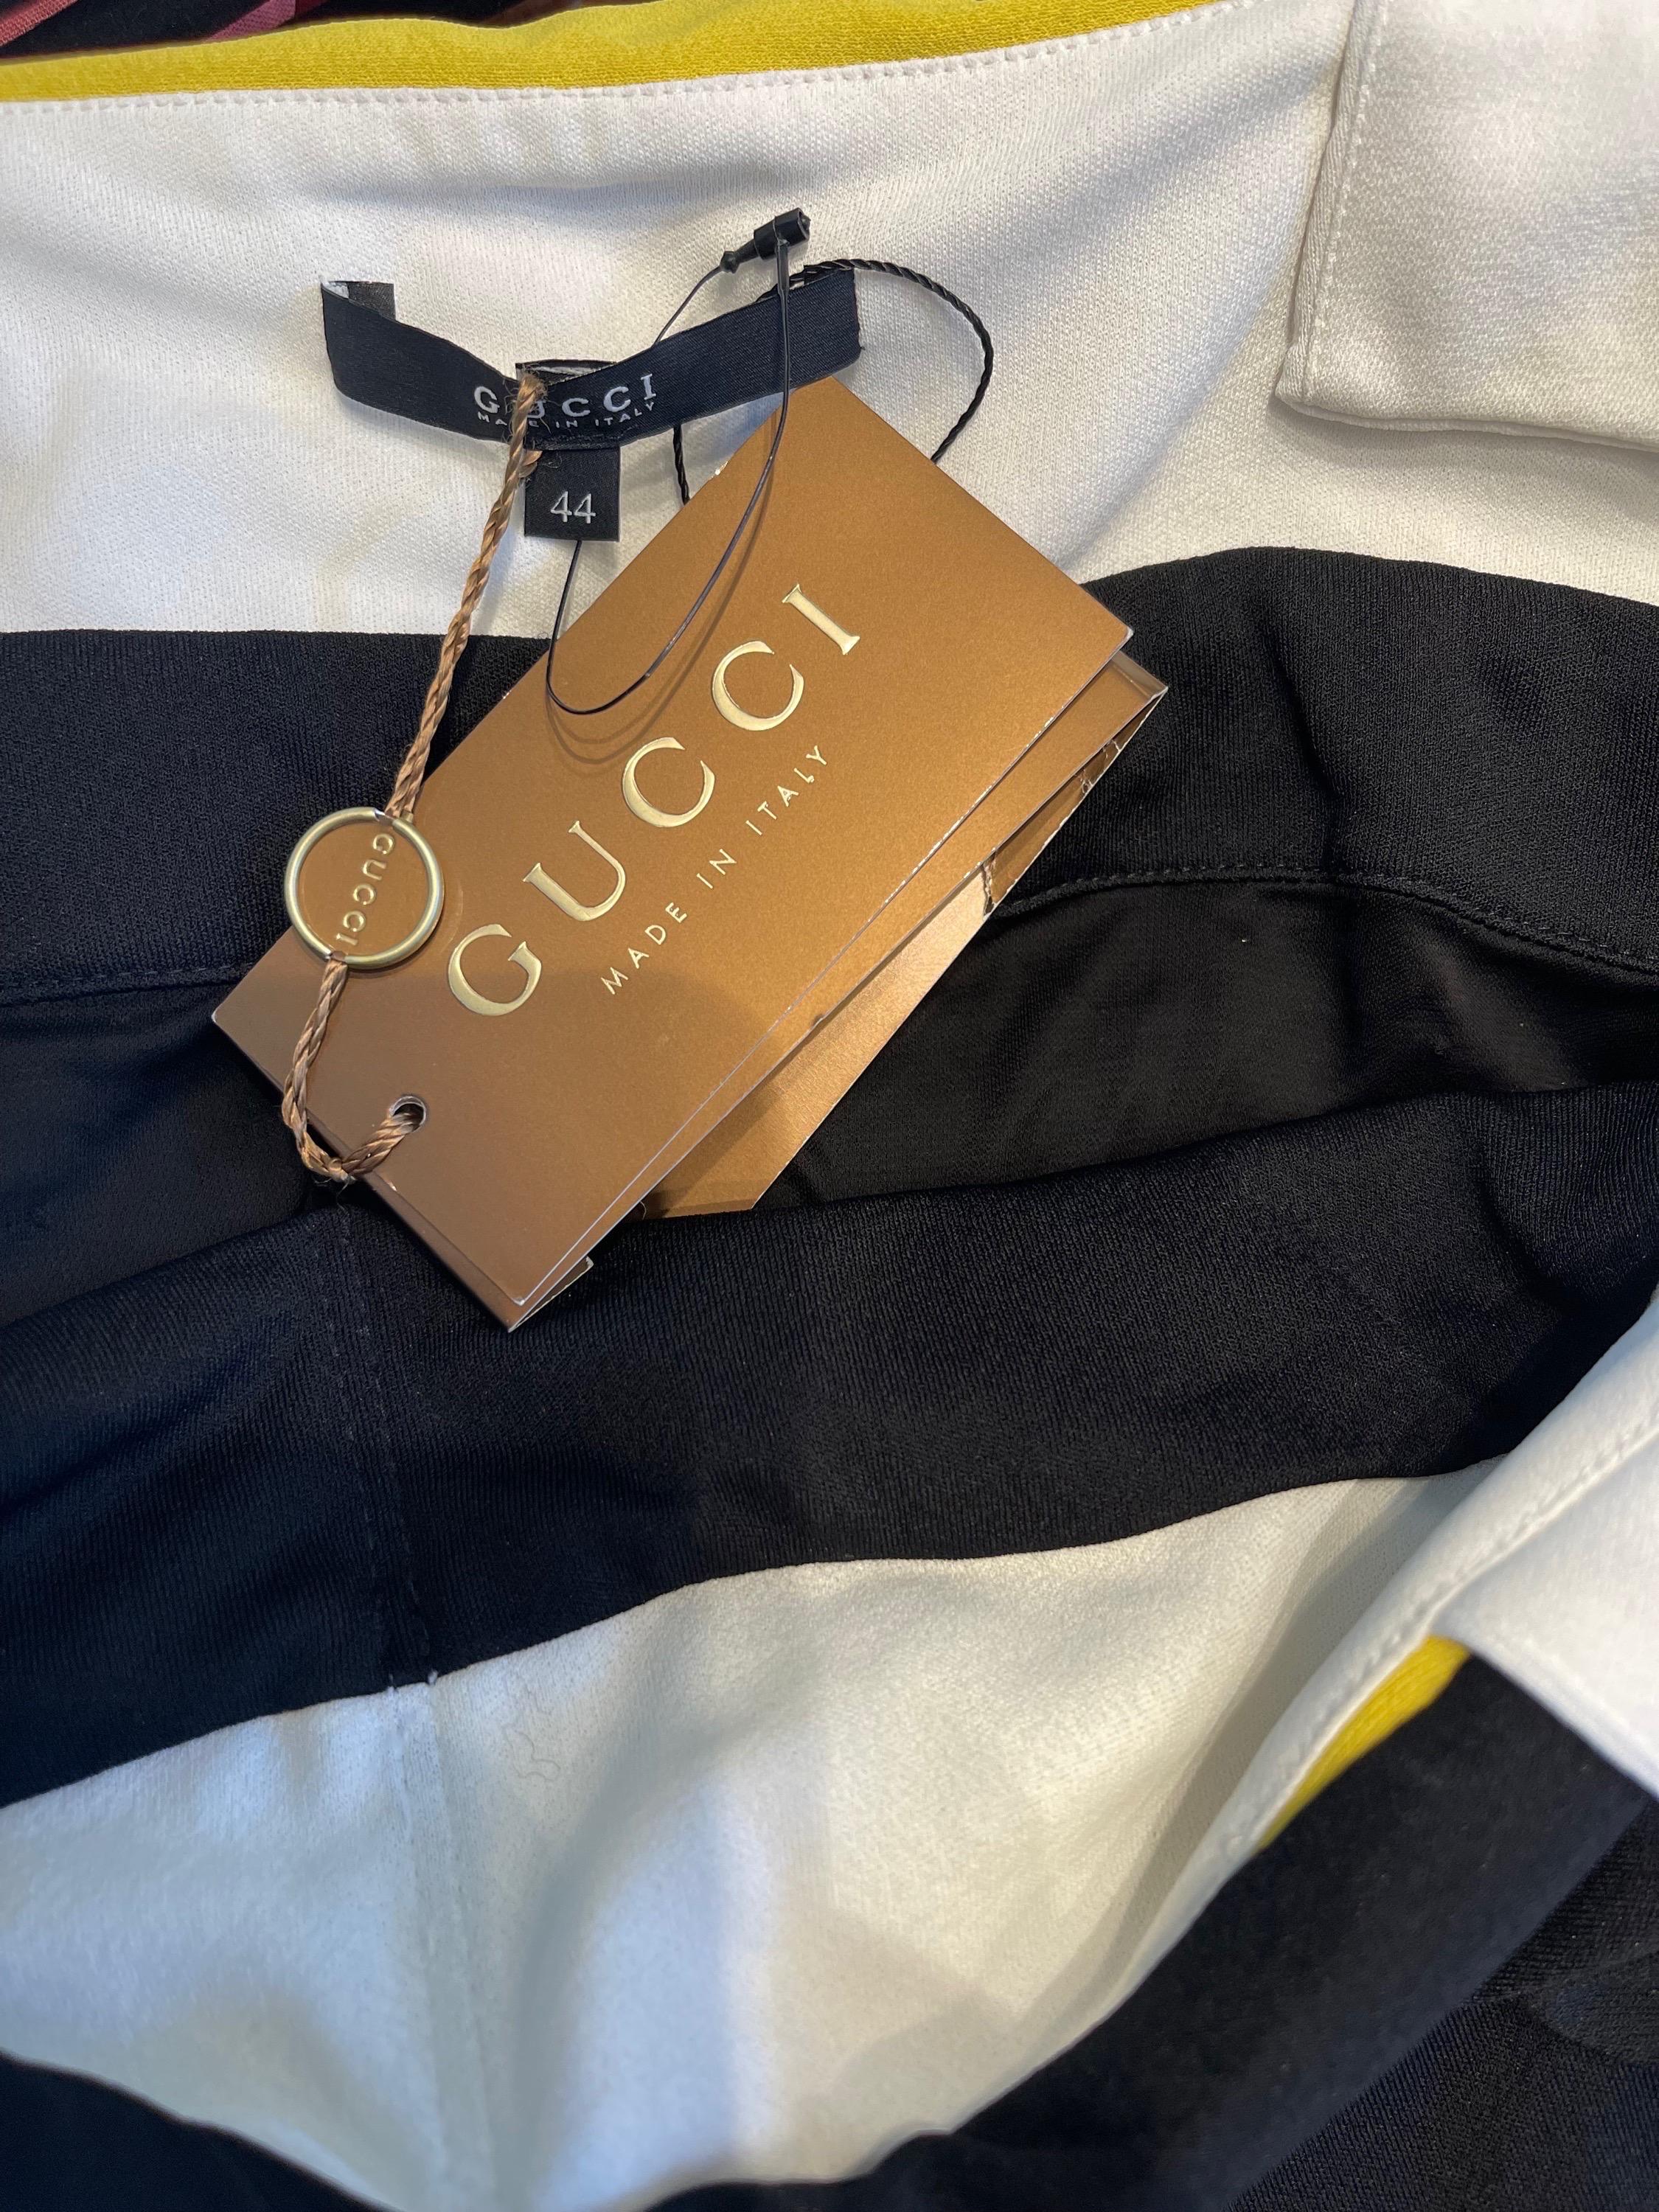 Chic brand new with tags GUCCI Spring 2008, by Frida Giannini dress ! Features a black body with white straps and a pop of yellow. Very flattering drapery is easy to wear. Hidden zipper up the side with hook-and-eye closure. Perfect for any day or